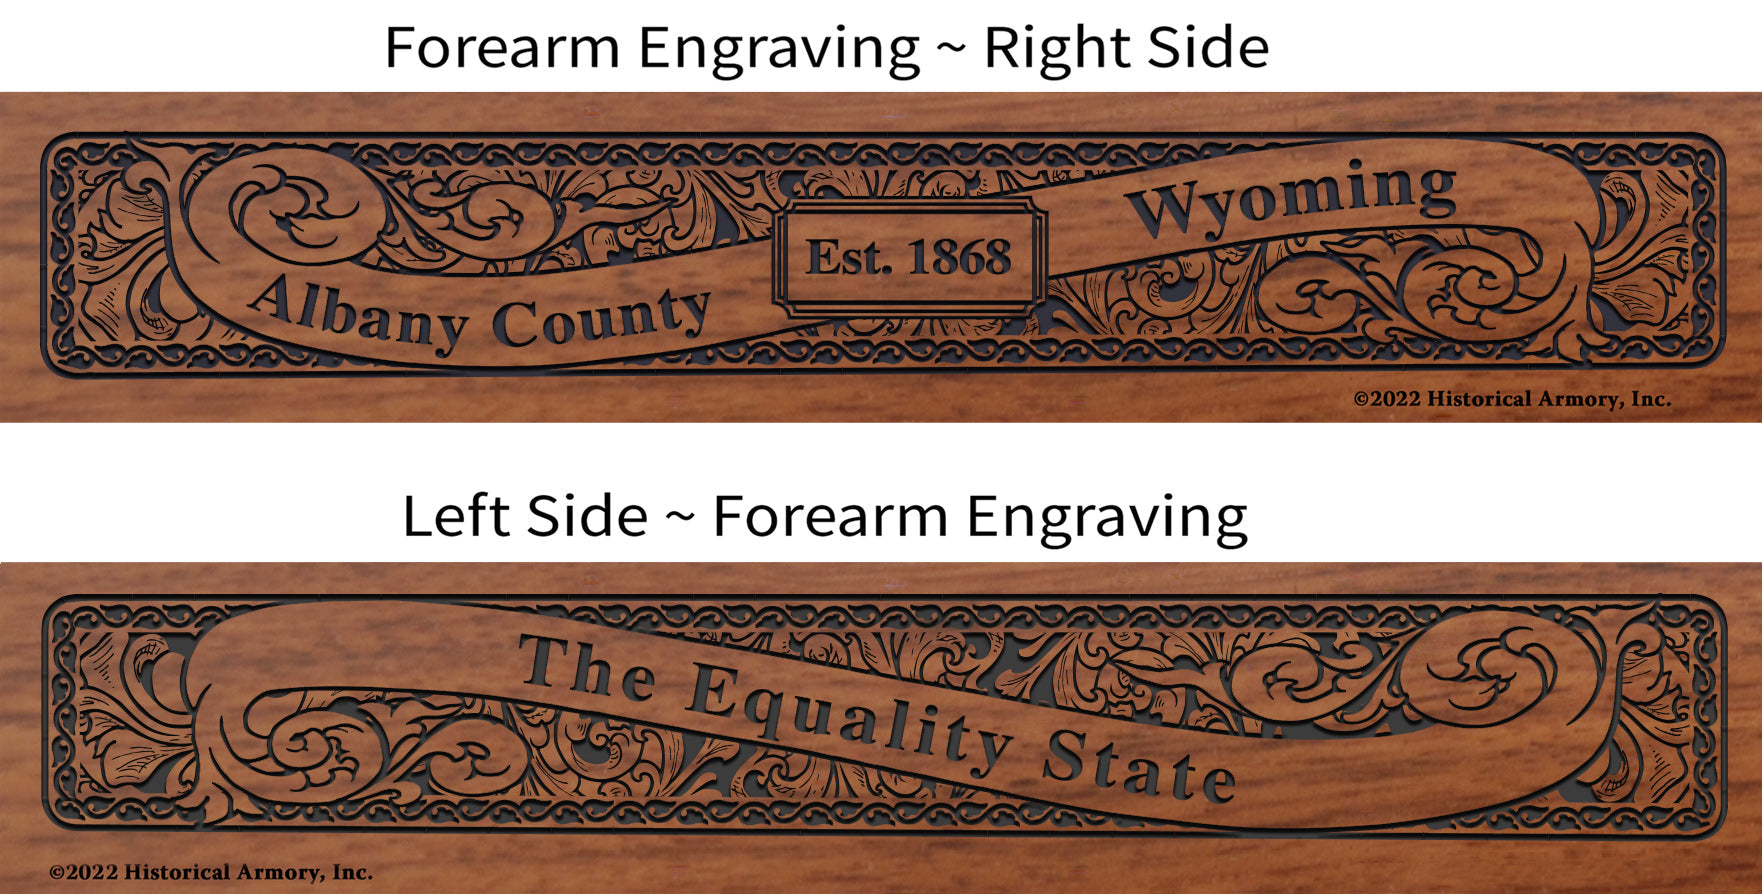 Albany County Wyoming Engraved Rifle Forearm